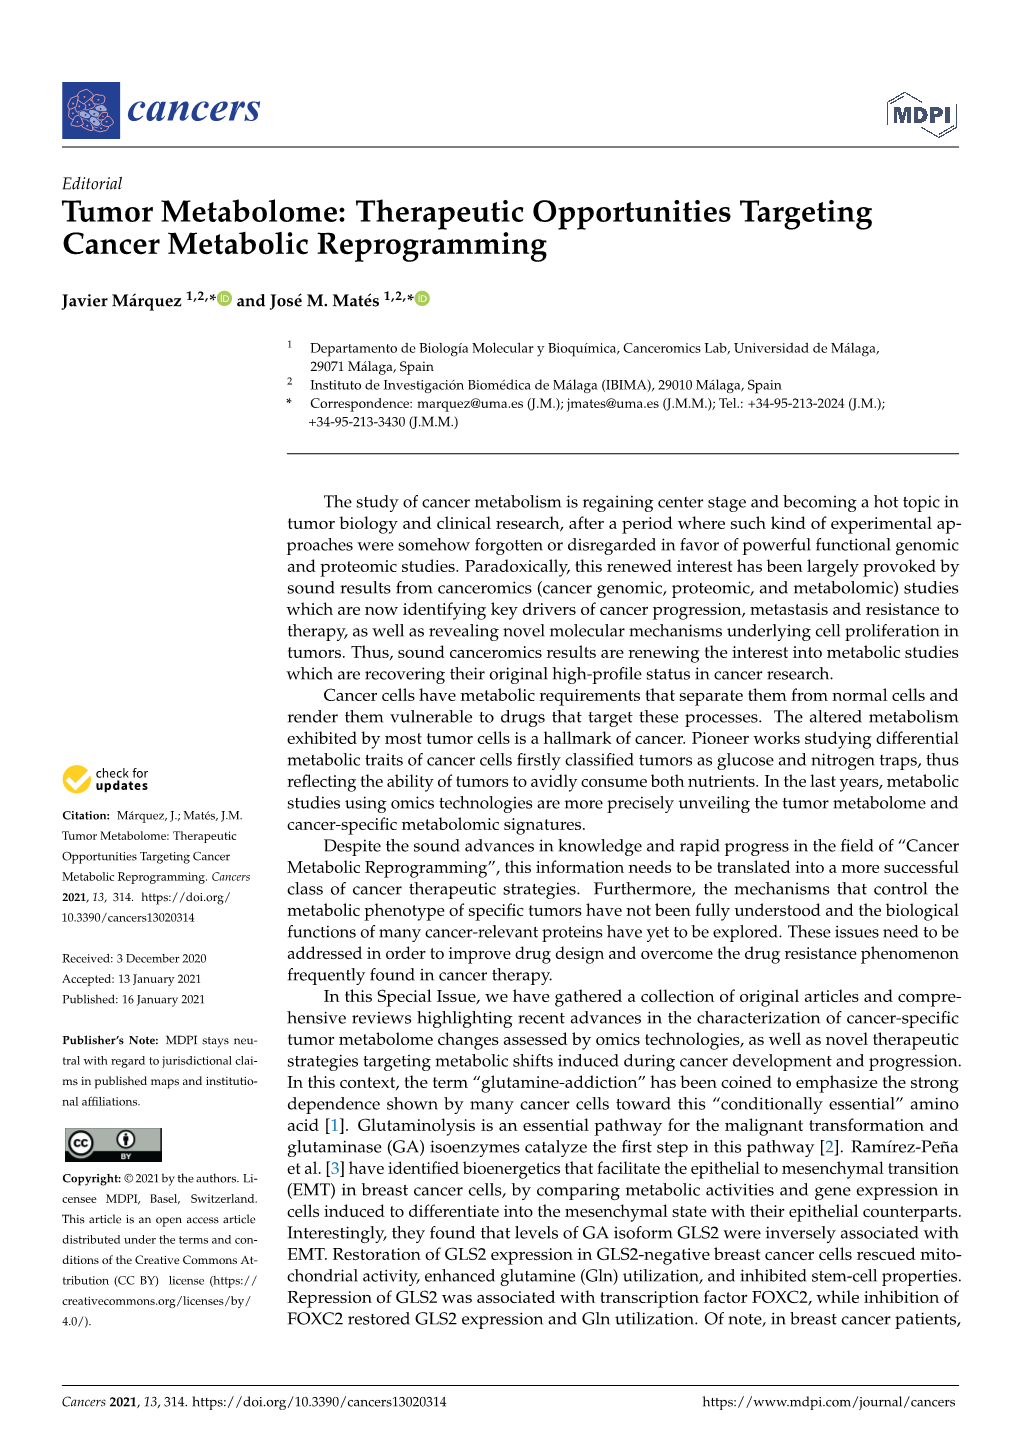 Tumor Metabolome: Therapeutic Opportunities Targeting Cancer Metabolic Reprogramming